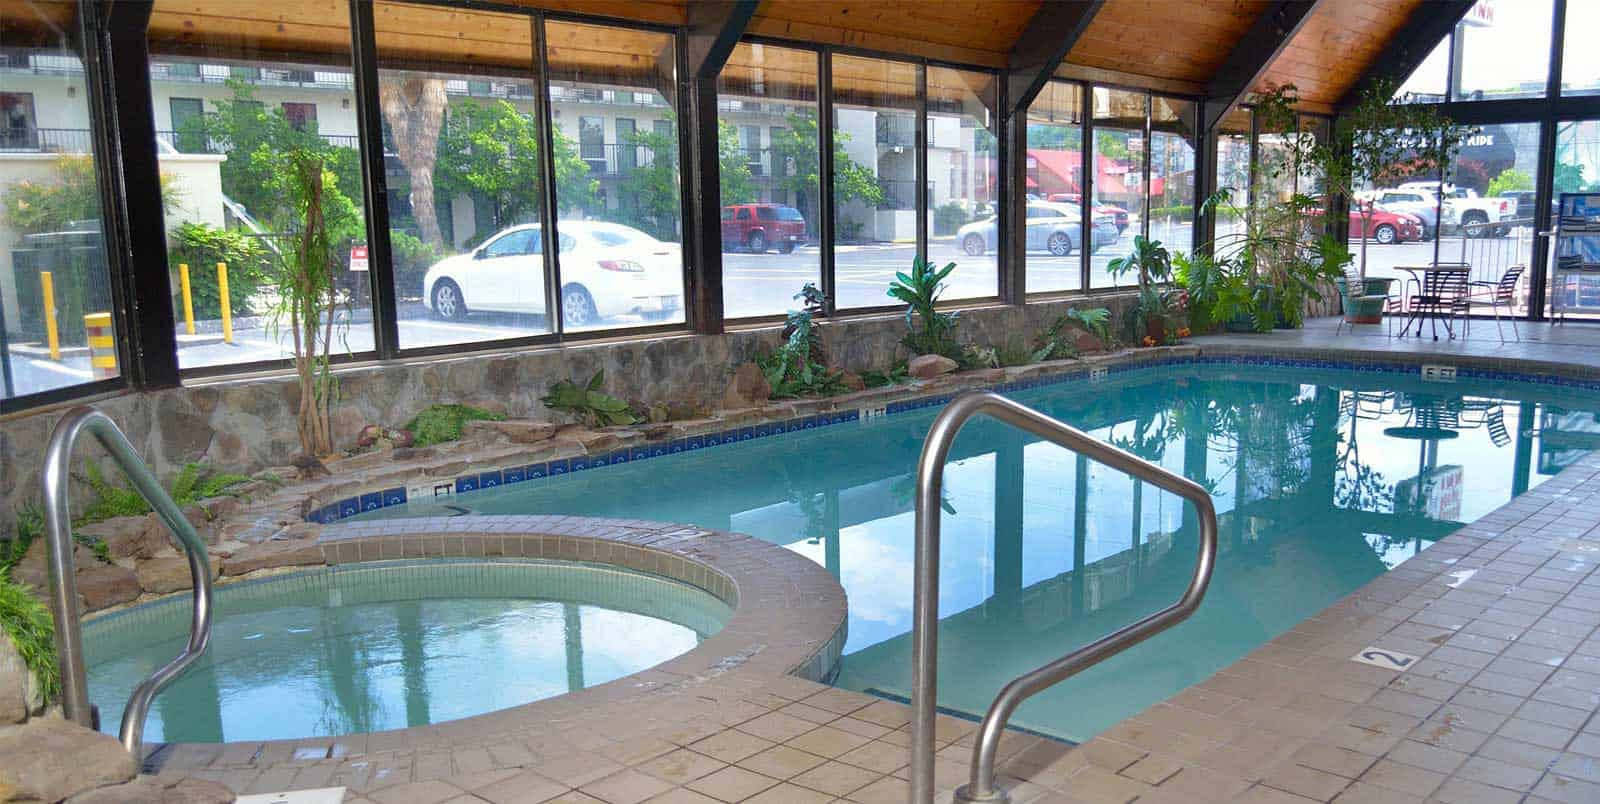 Indoor swimming pool at Valley Forge Inn in Pigeon Forge